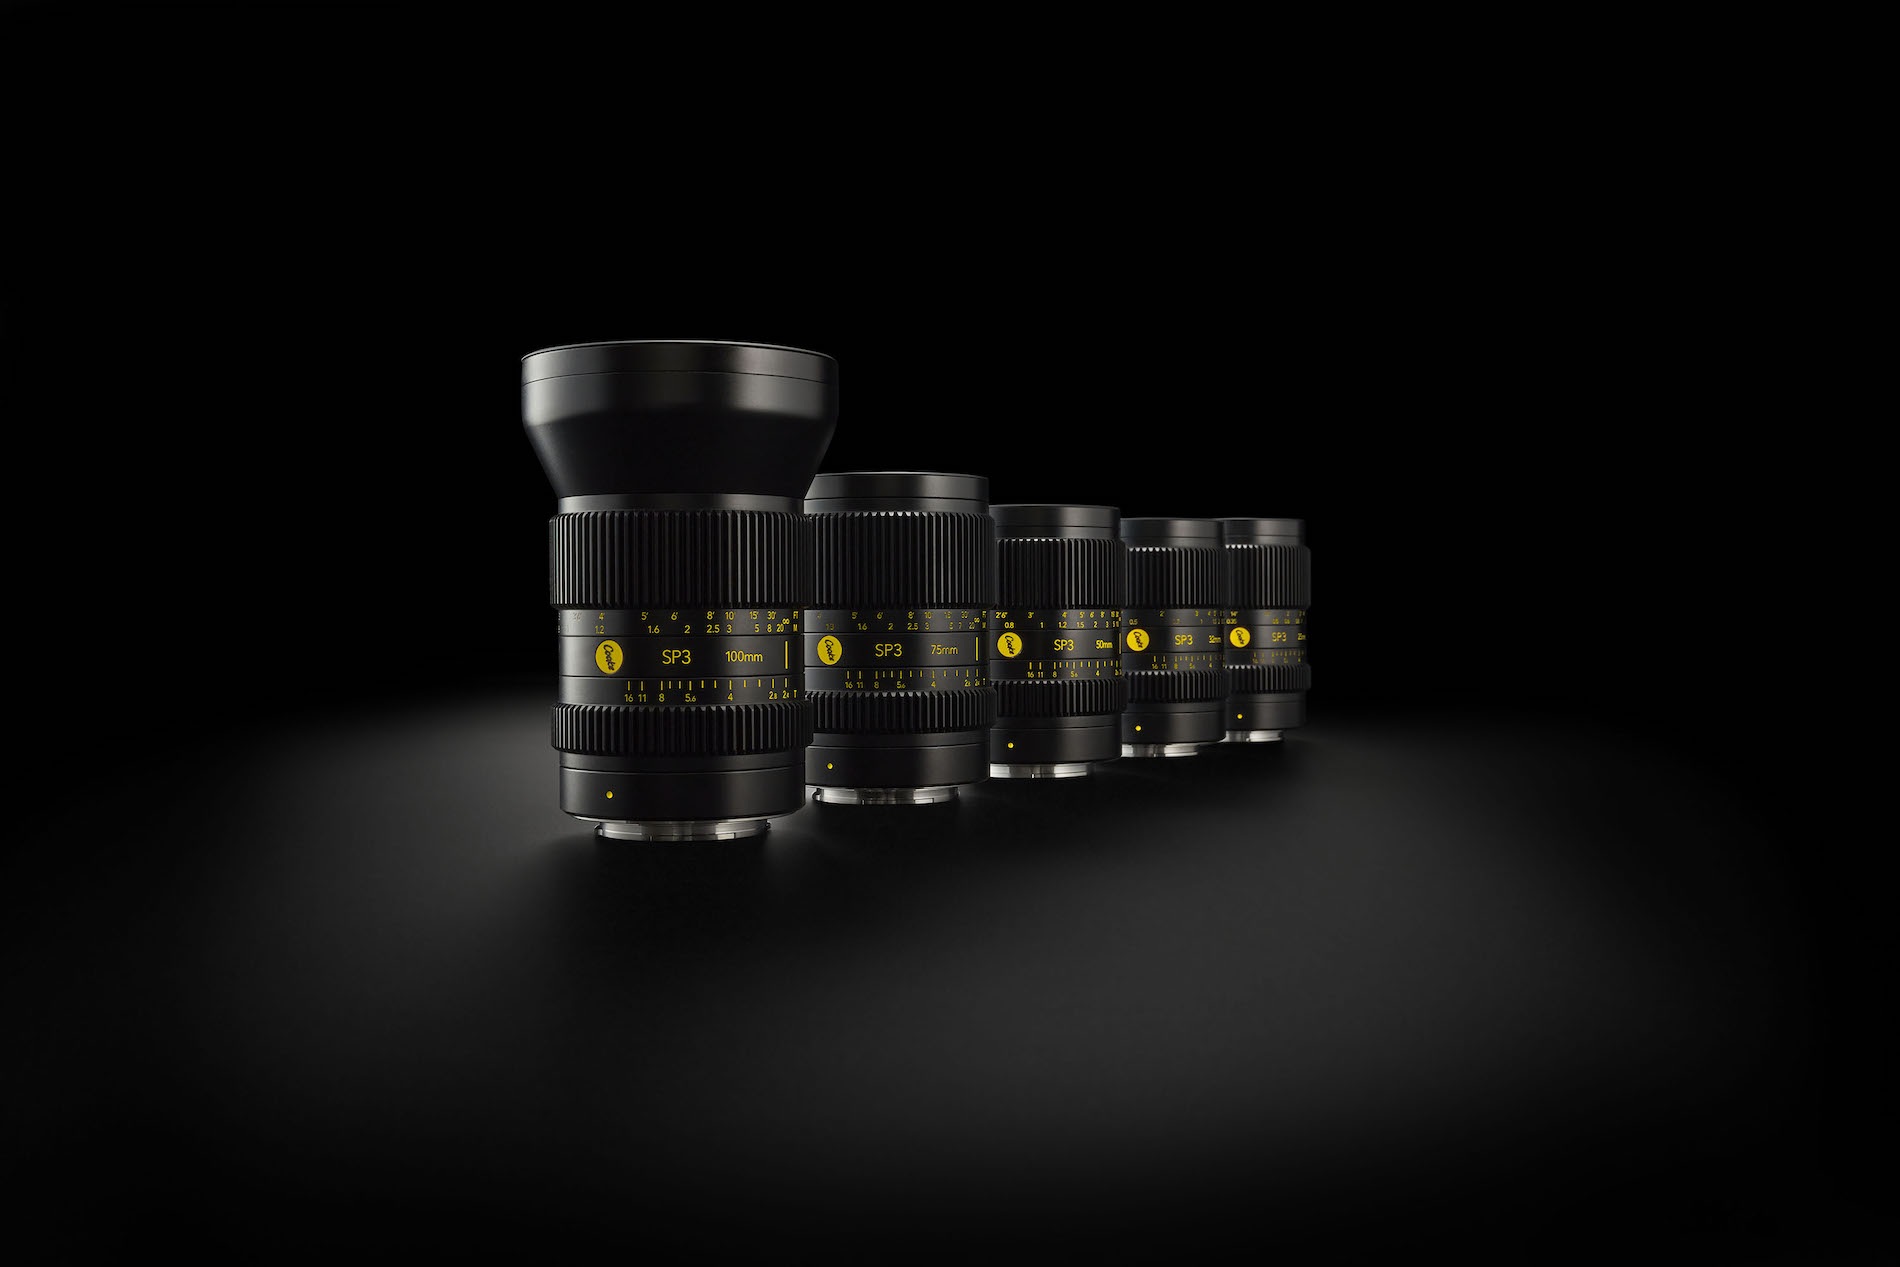 Cooke SP3 lineup on black